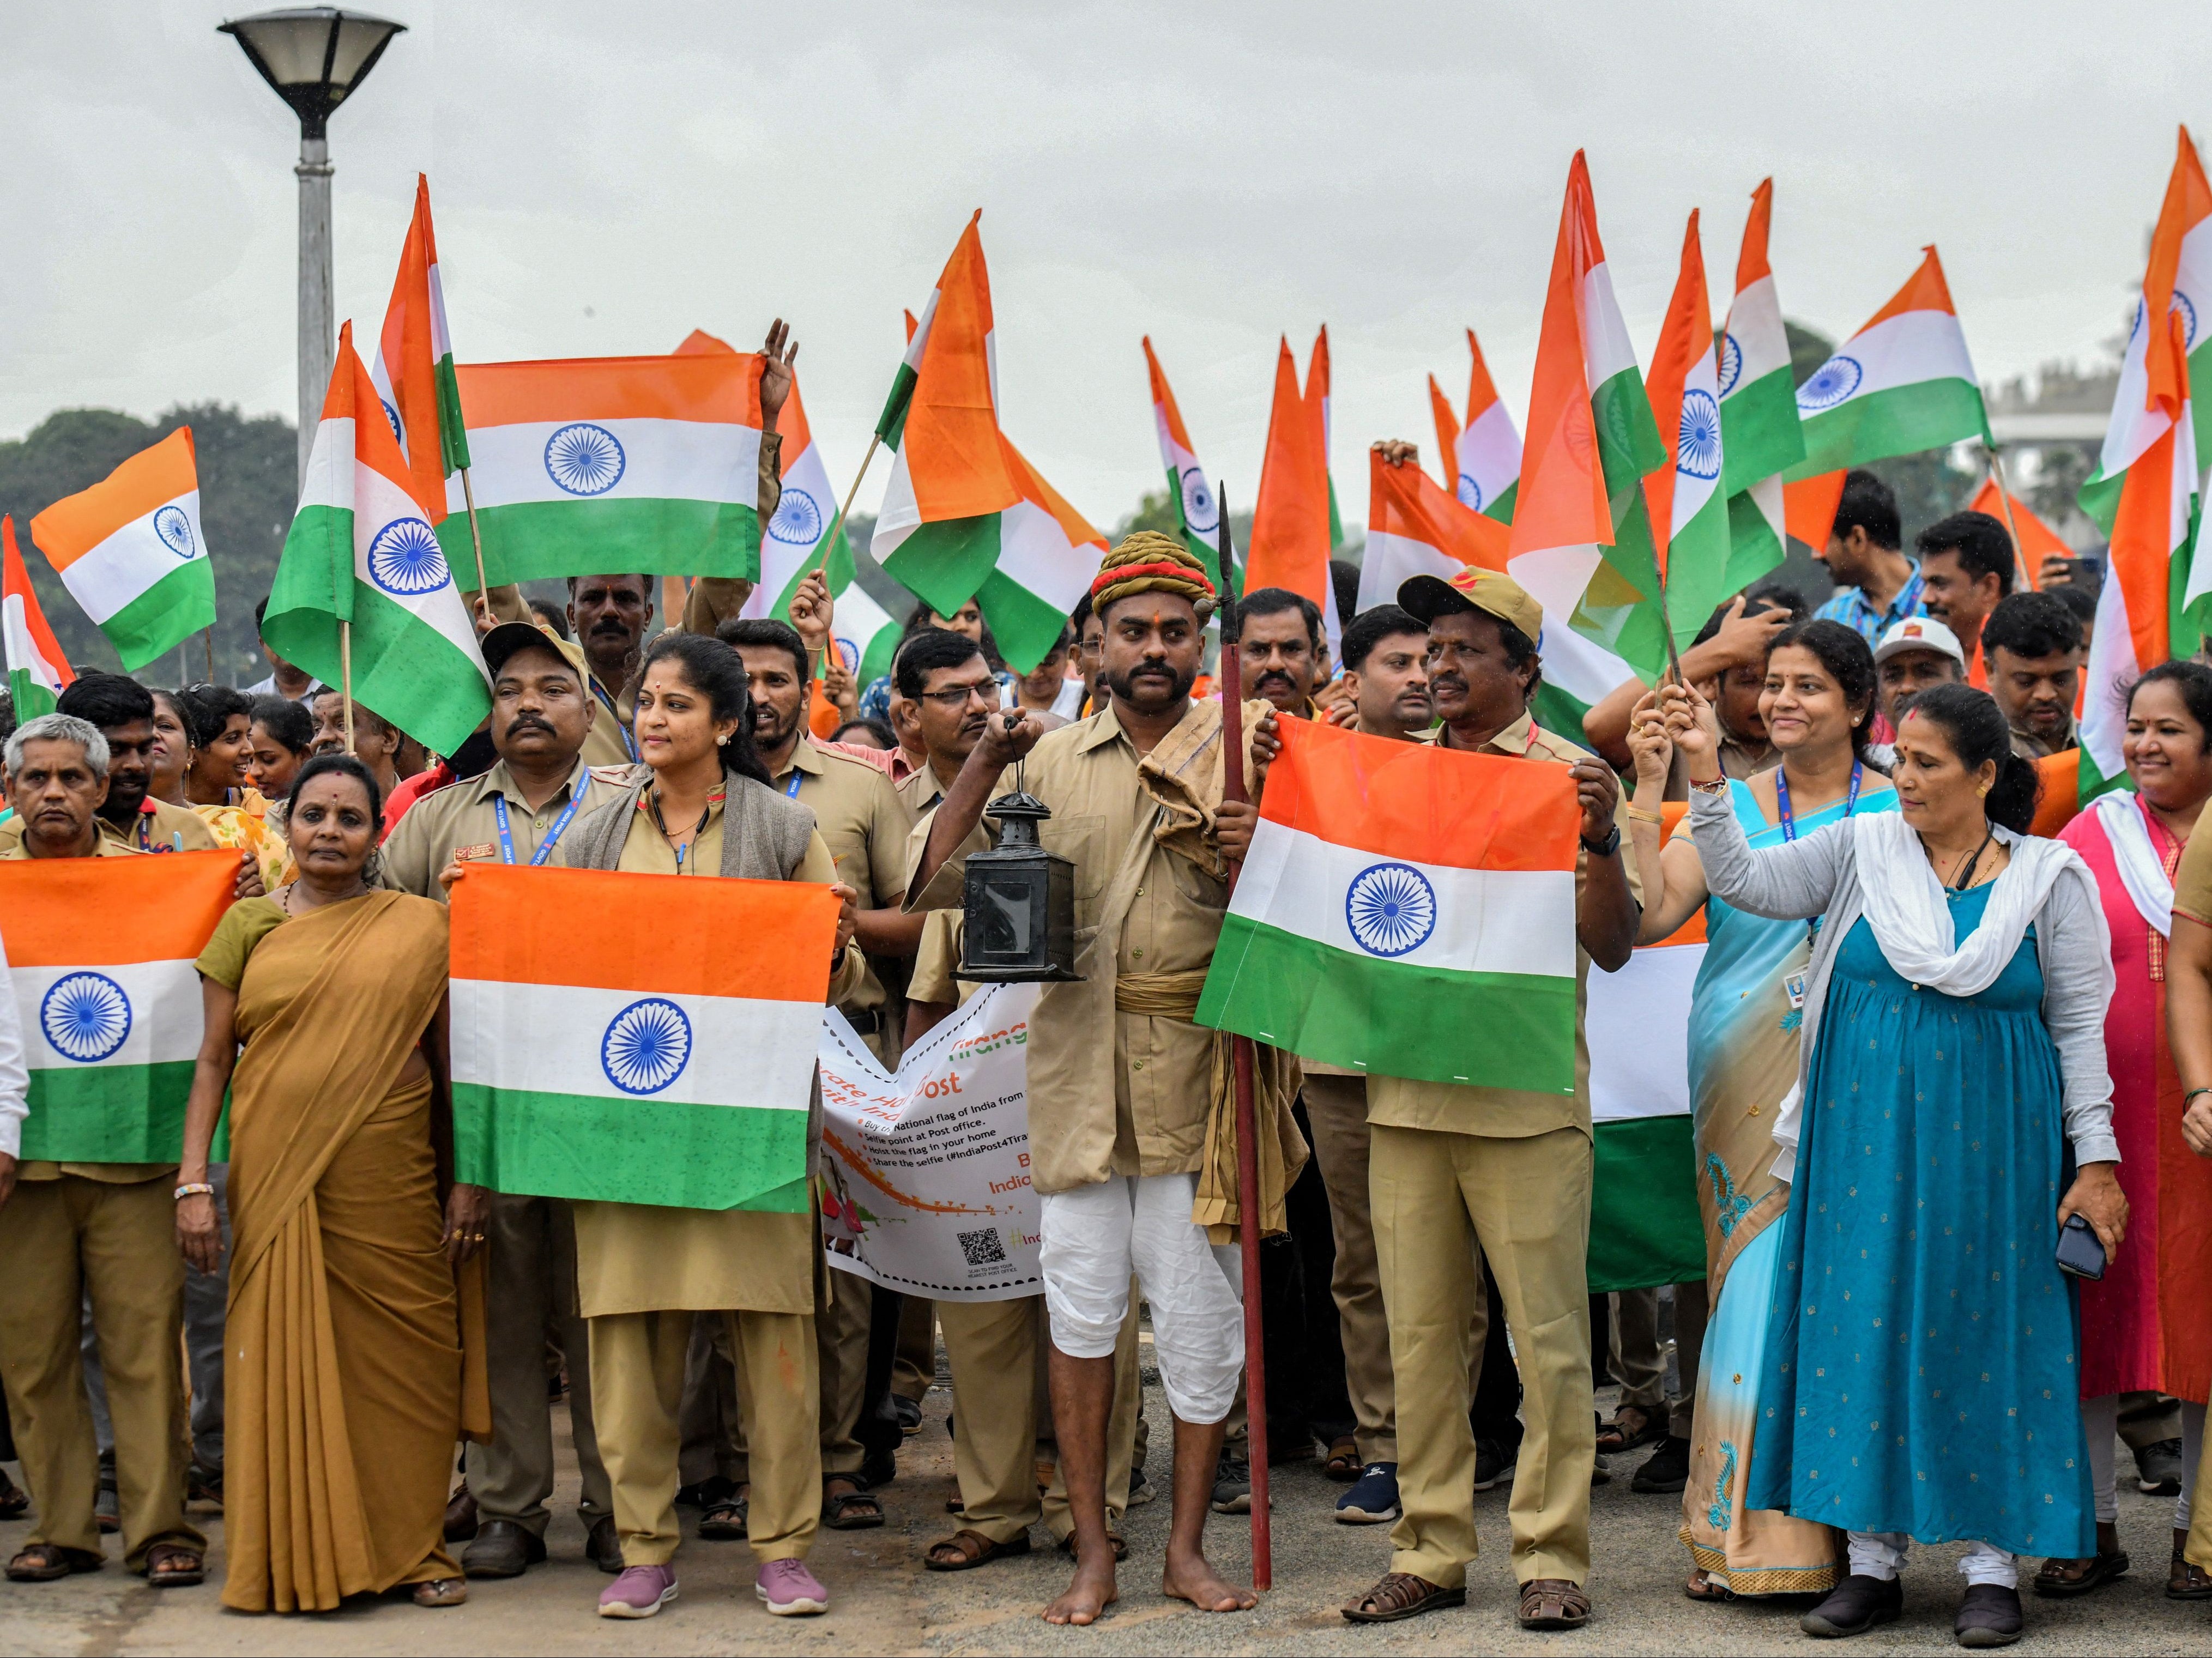 Employees of the postal department wave the Indian flag as they pass the Vidhana Soudha building during Tiranga Yatra